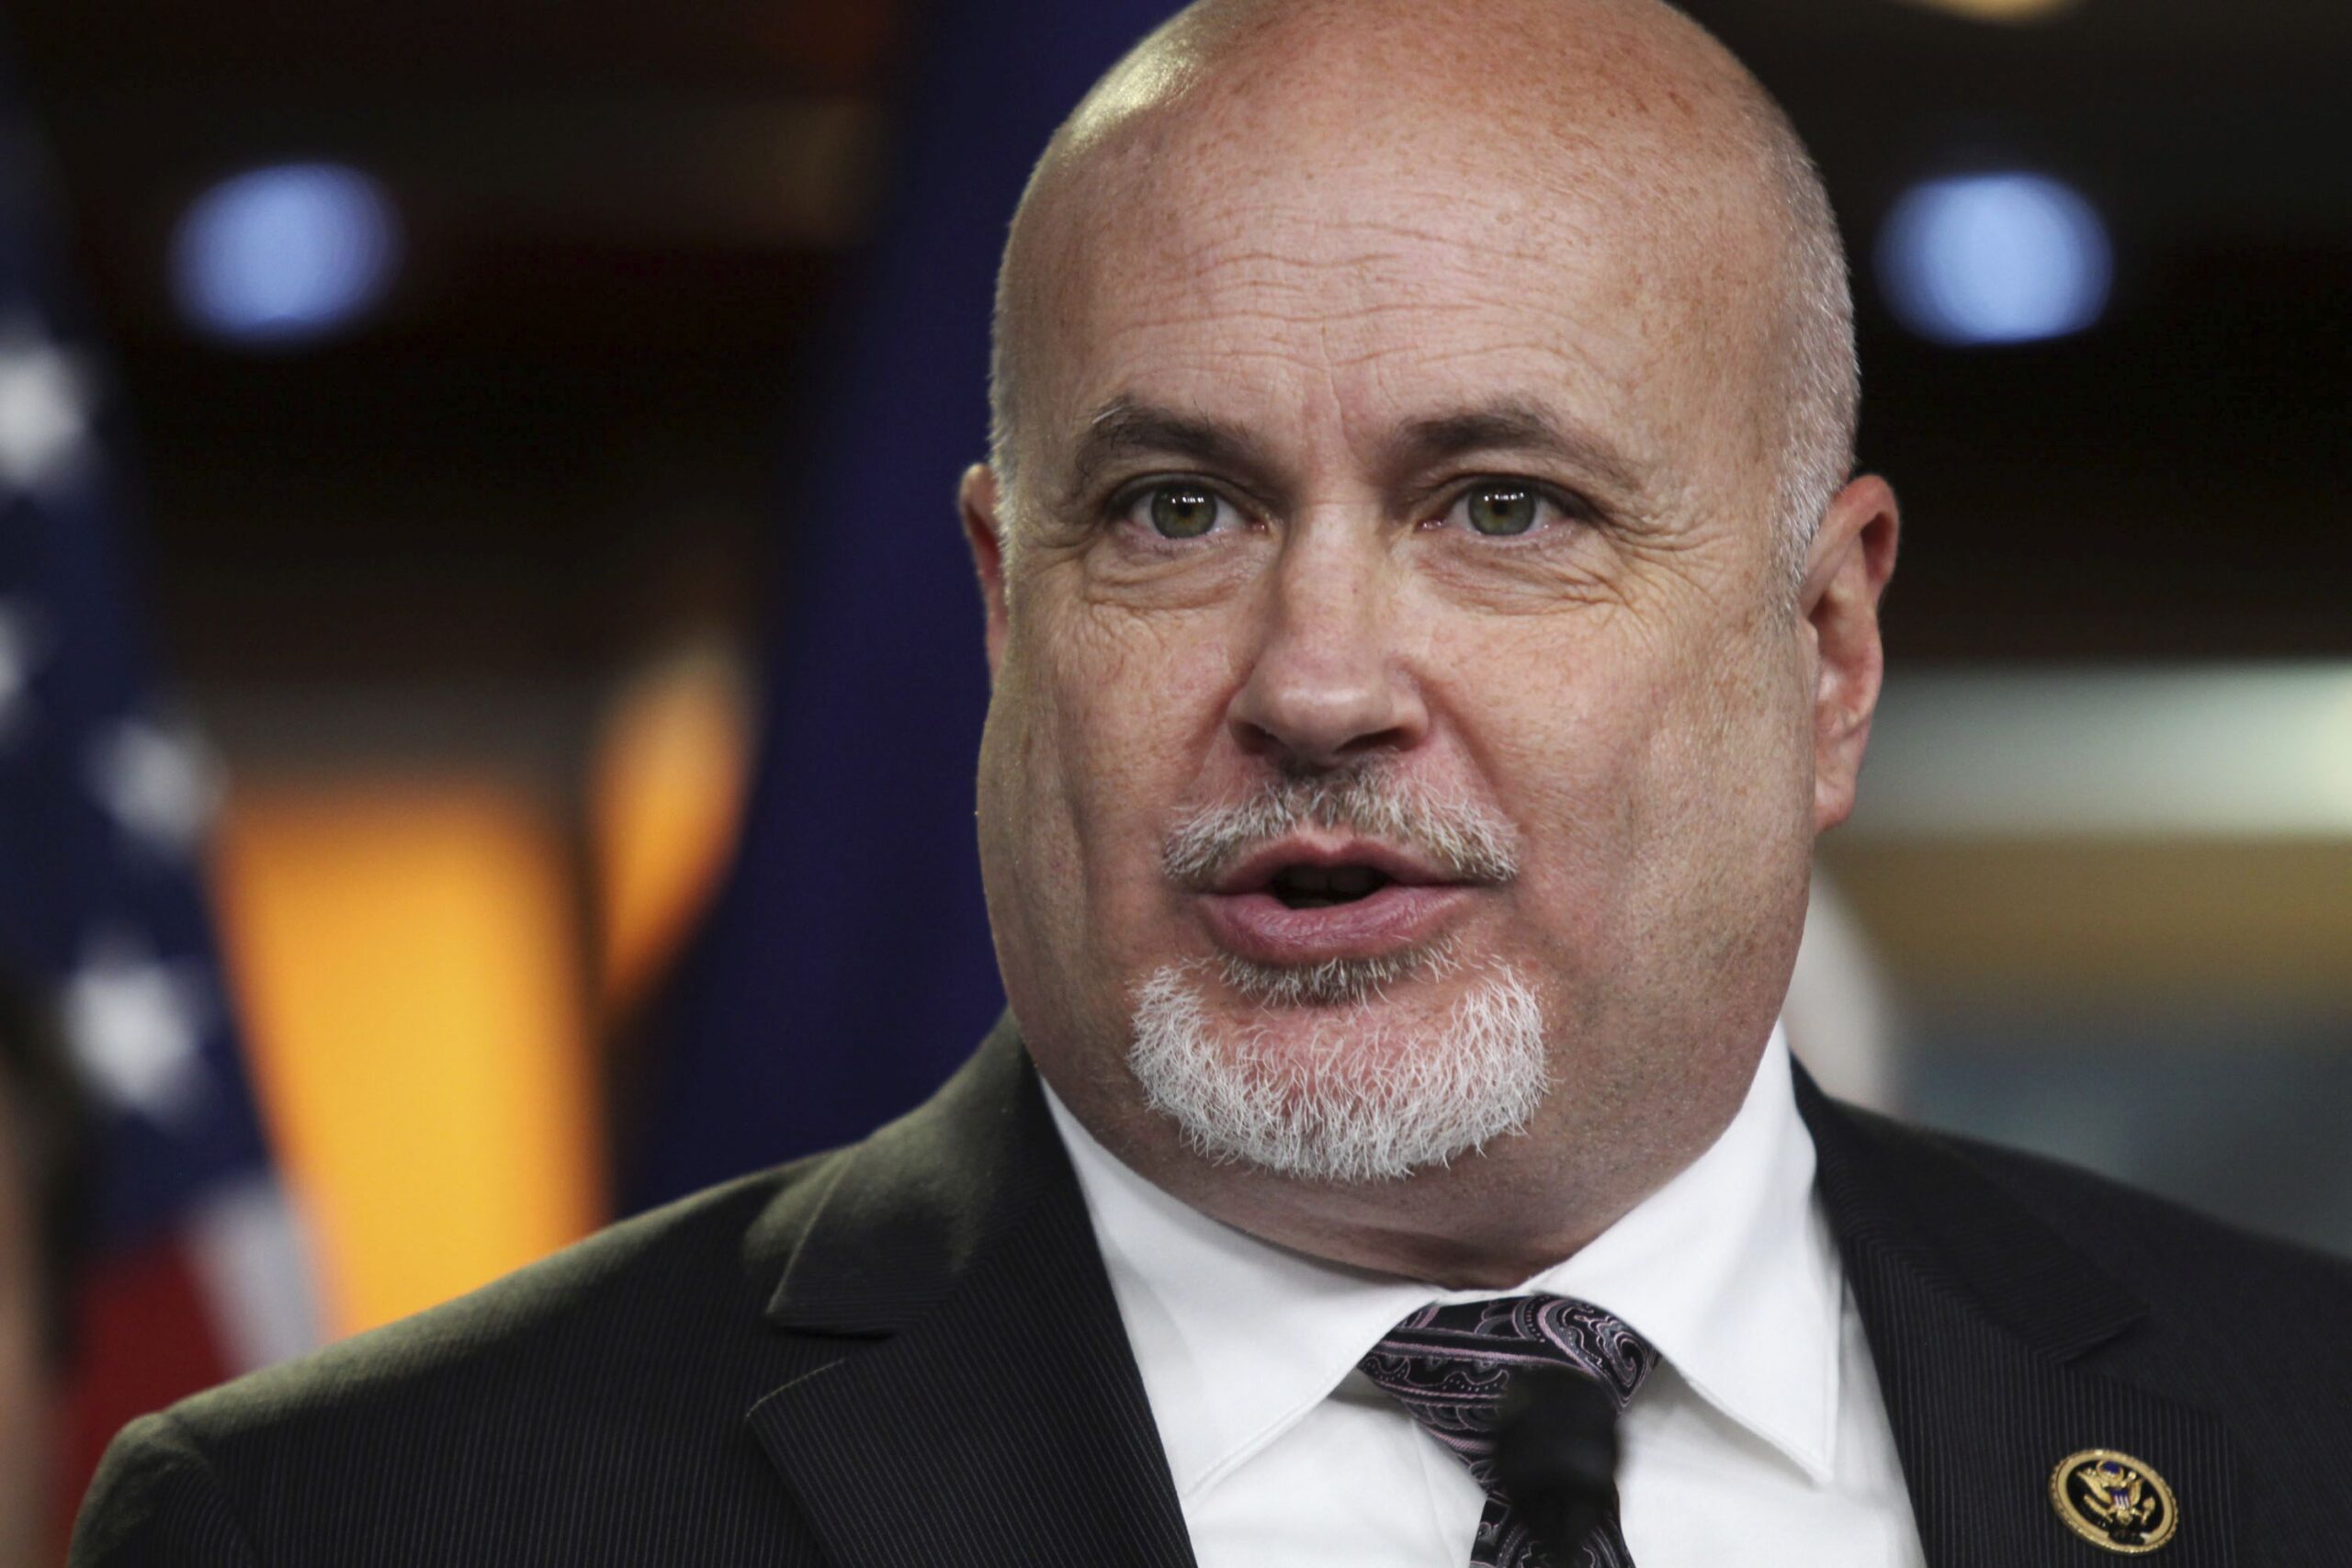 Mark Pocan speaks at a news conference on Capitol Hill